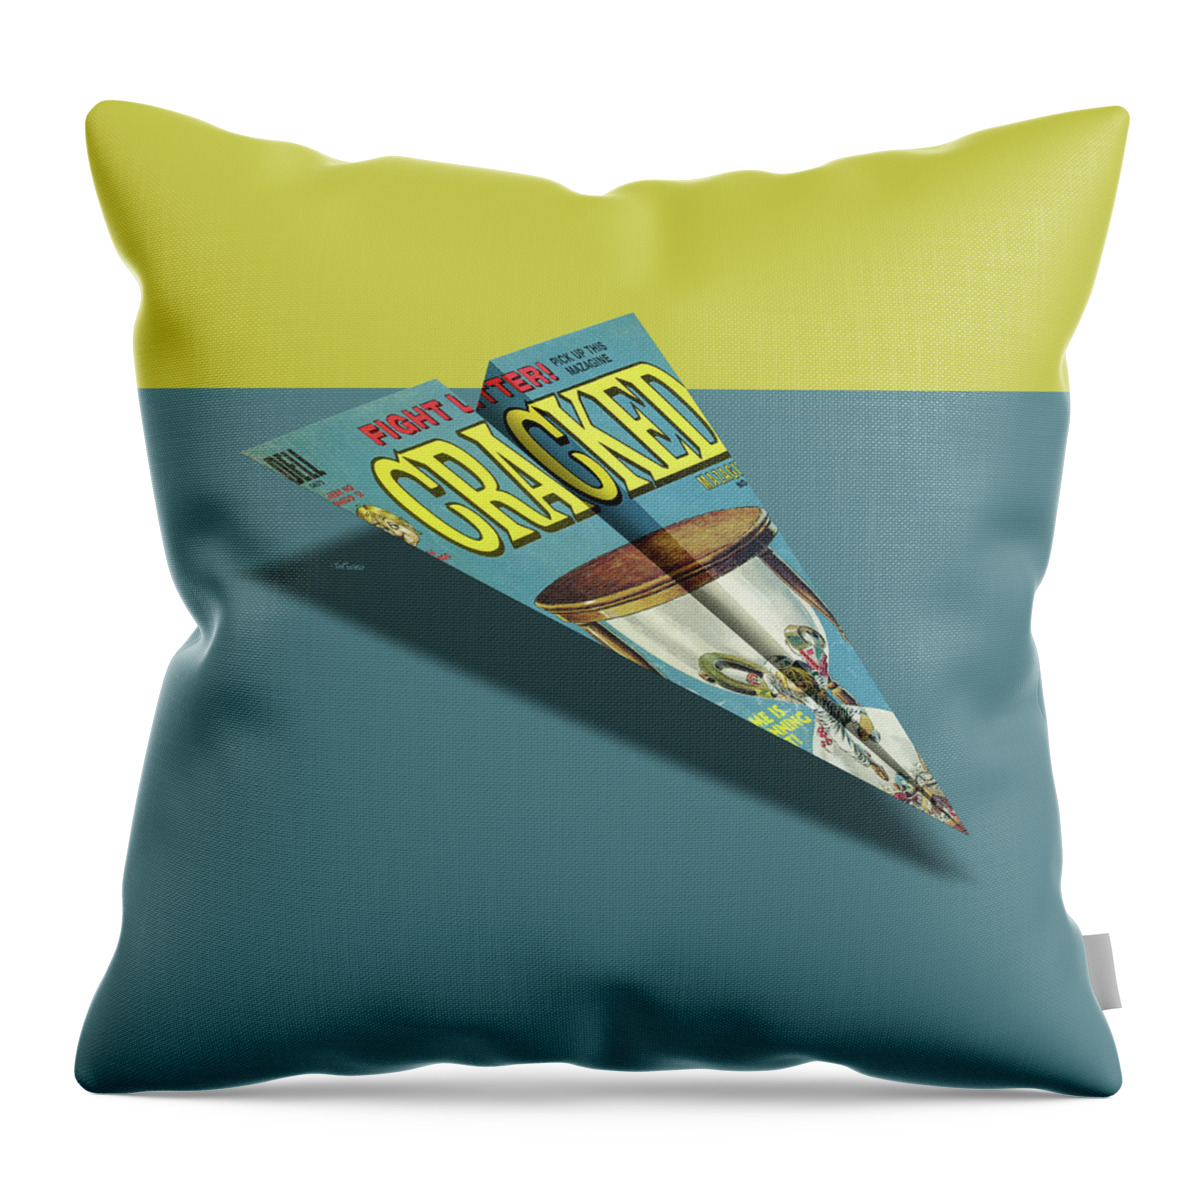 109 Throw Pillow featuring the digital art 109s Cracked MAD Paper Airplanes by YoPedro